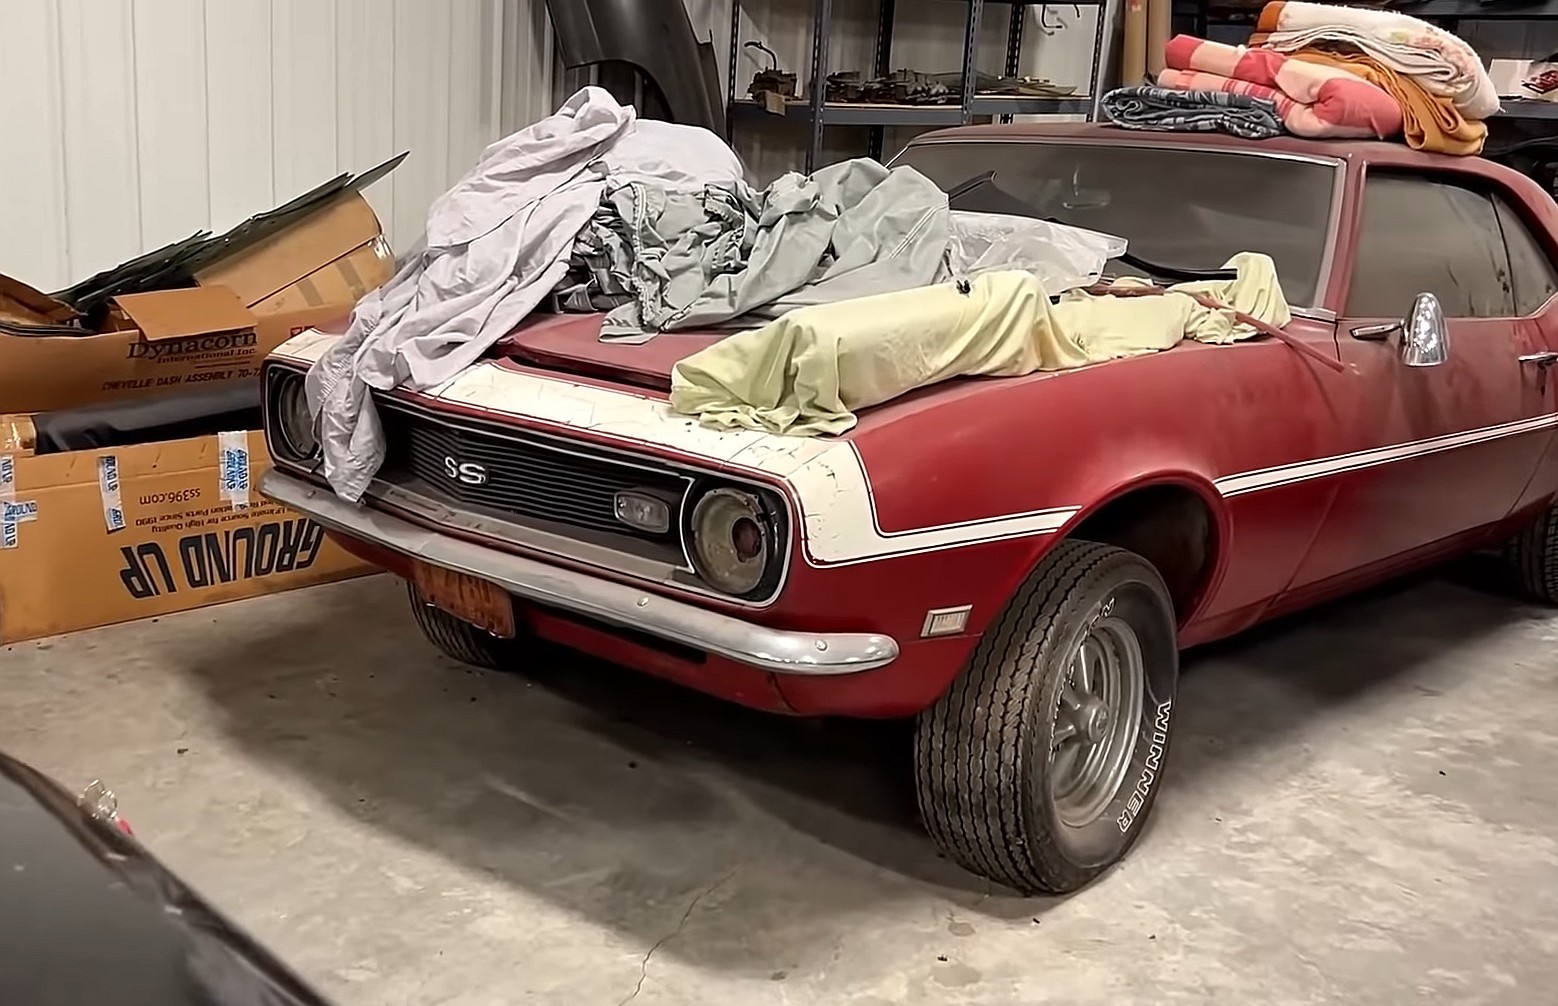 epic barn find includes 39 chevrolet camaro and chevelle classics a few rare ones too 4